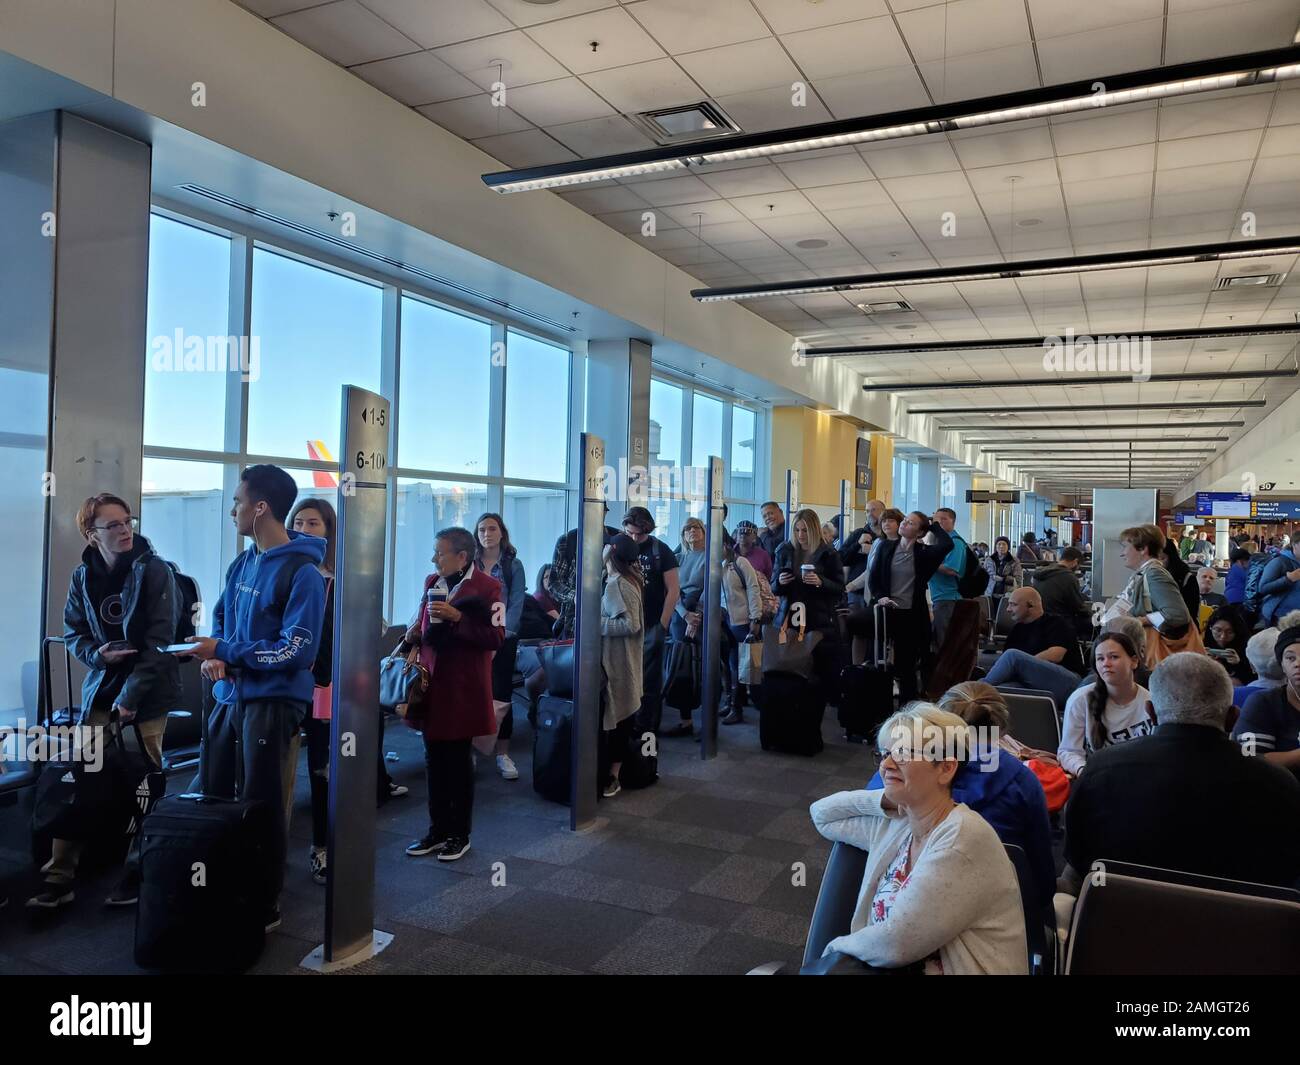 People line up based on boarding group numbers to board a Southwest Airlines flight at Oakland International Airport (OAK) in Oakland, California, January 5, 2020. () Stock Photo